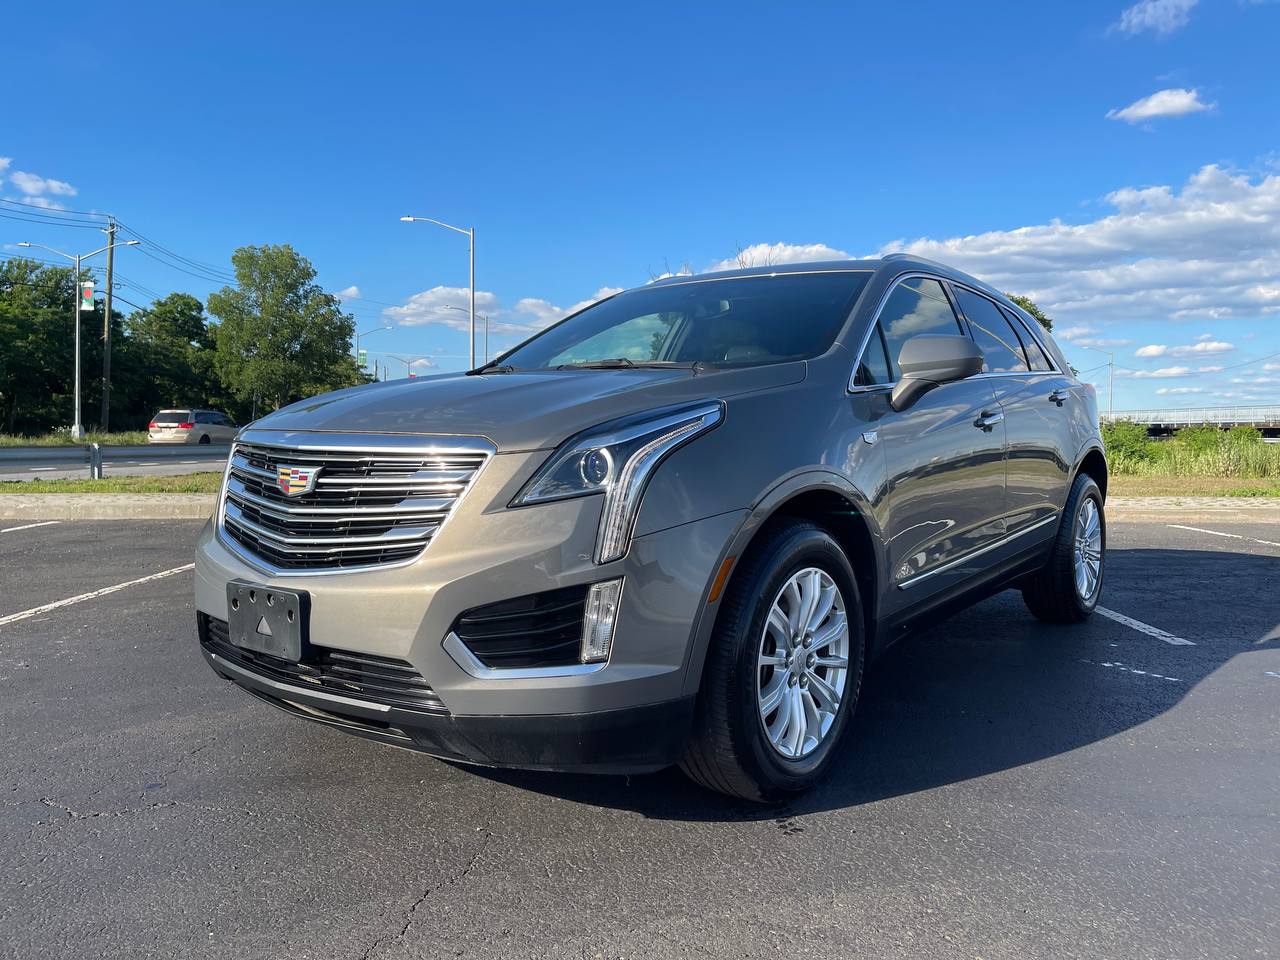 Used Car for sale - 2018 XT5 AWD Cadillac  in Staten Island, NY